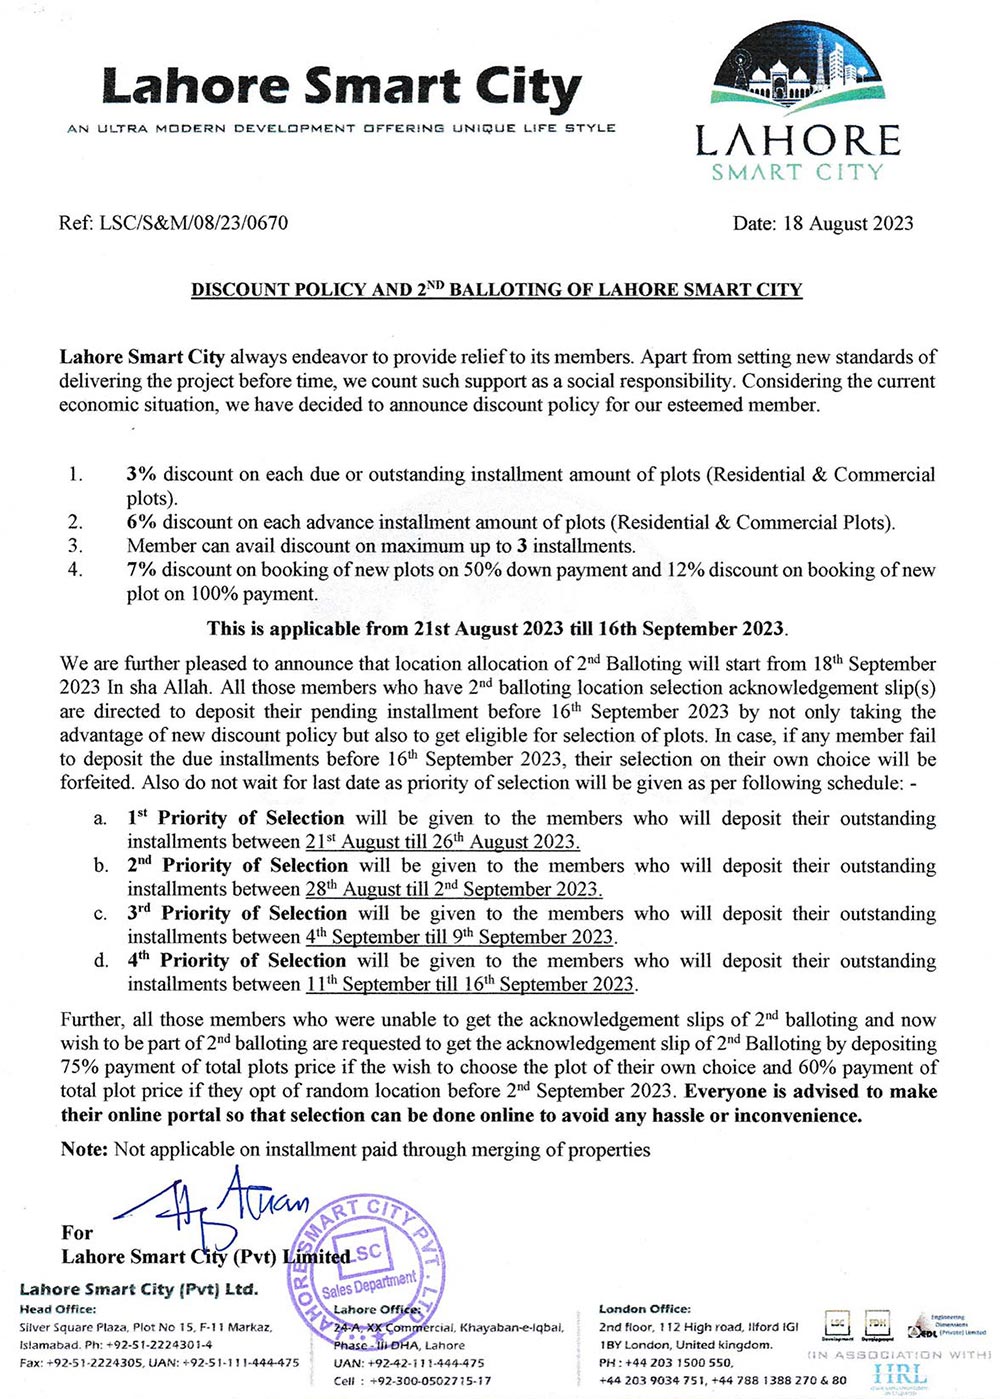 New "Discount Policy" and 2nd Balloting of Lahore Smart City